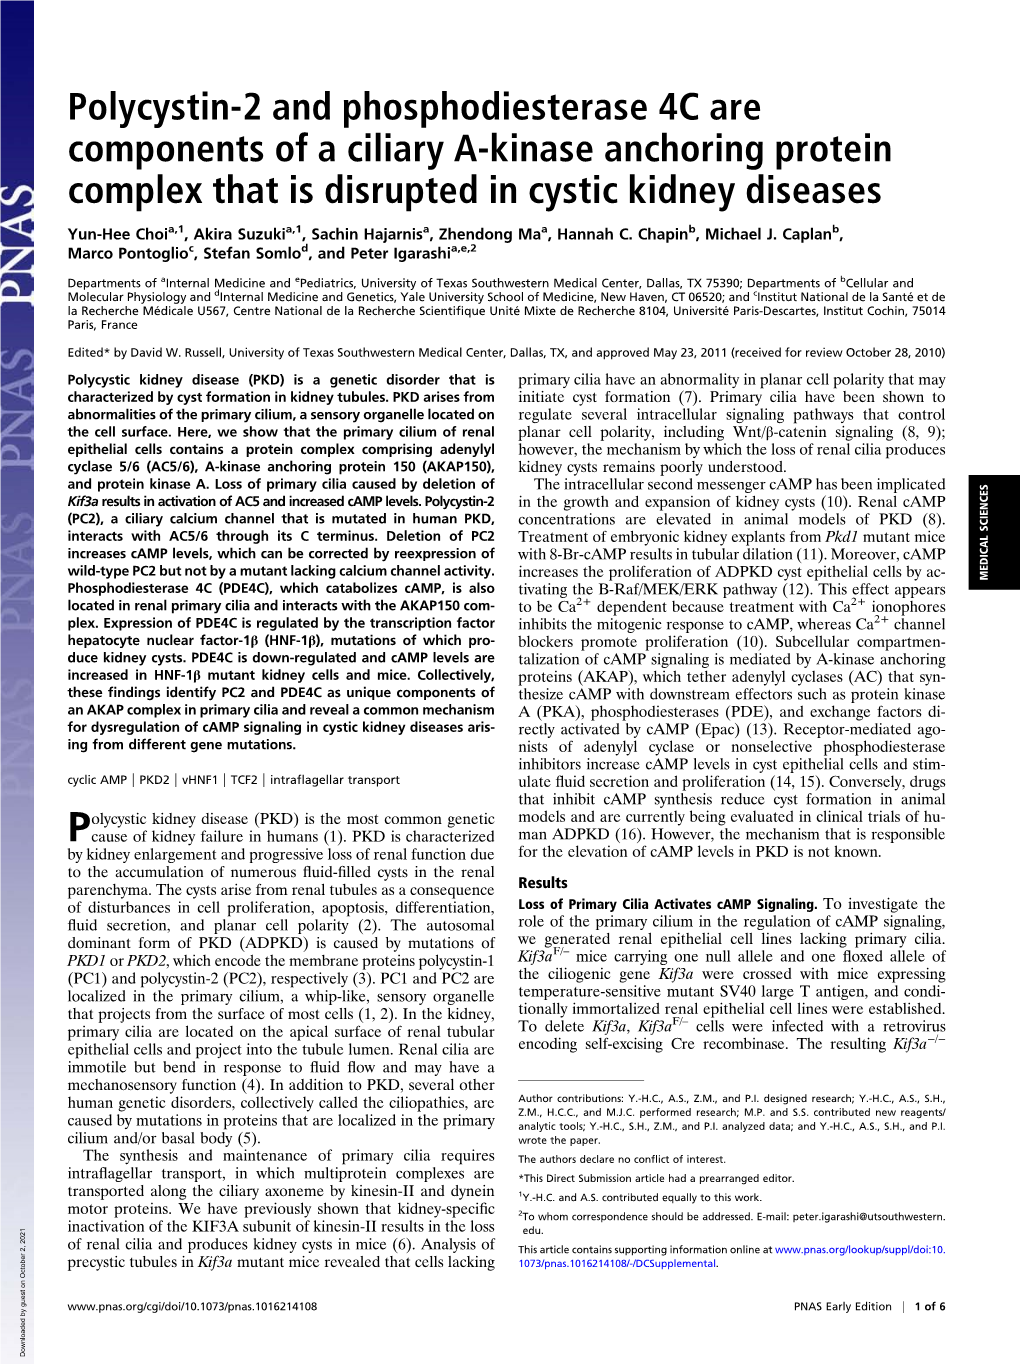 Polycystin-2 and Phosphodiesterase 4C Are Components of a Ciliary A-Kinase Anchoring Protein Complex That Is Disrupted in Cystic Kidney Diseases